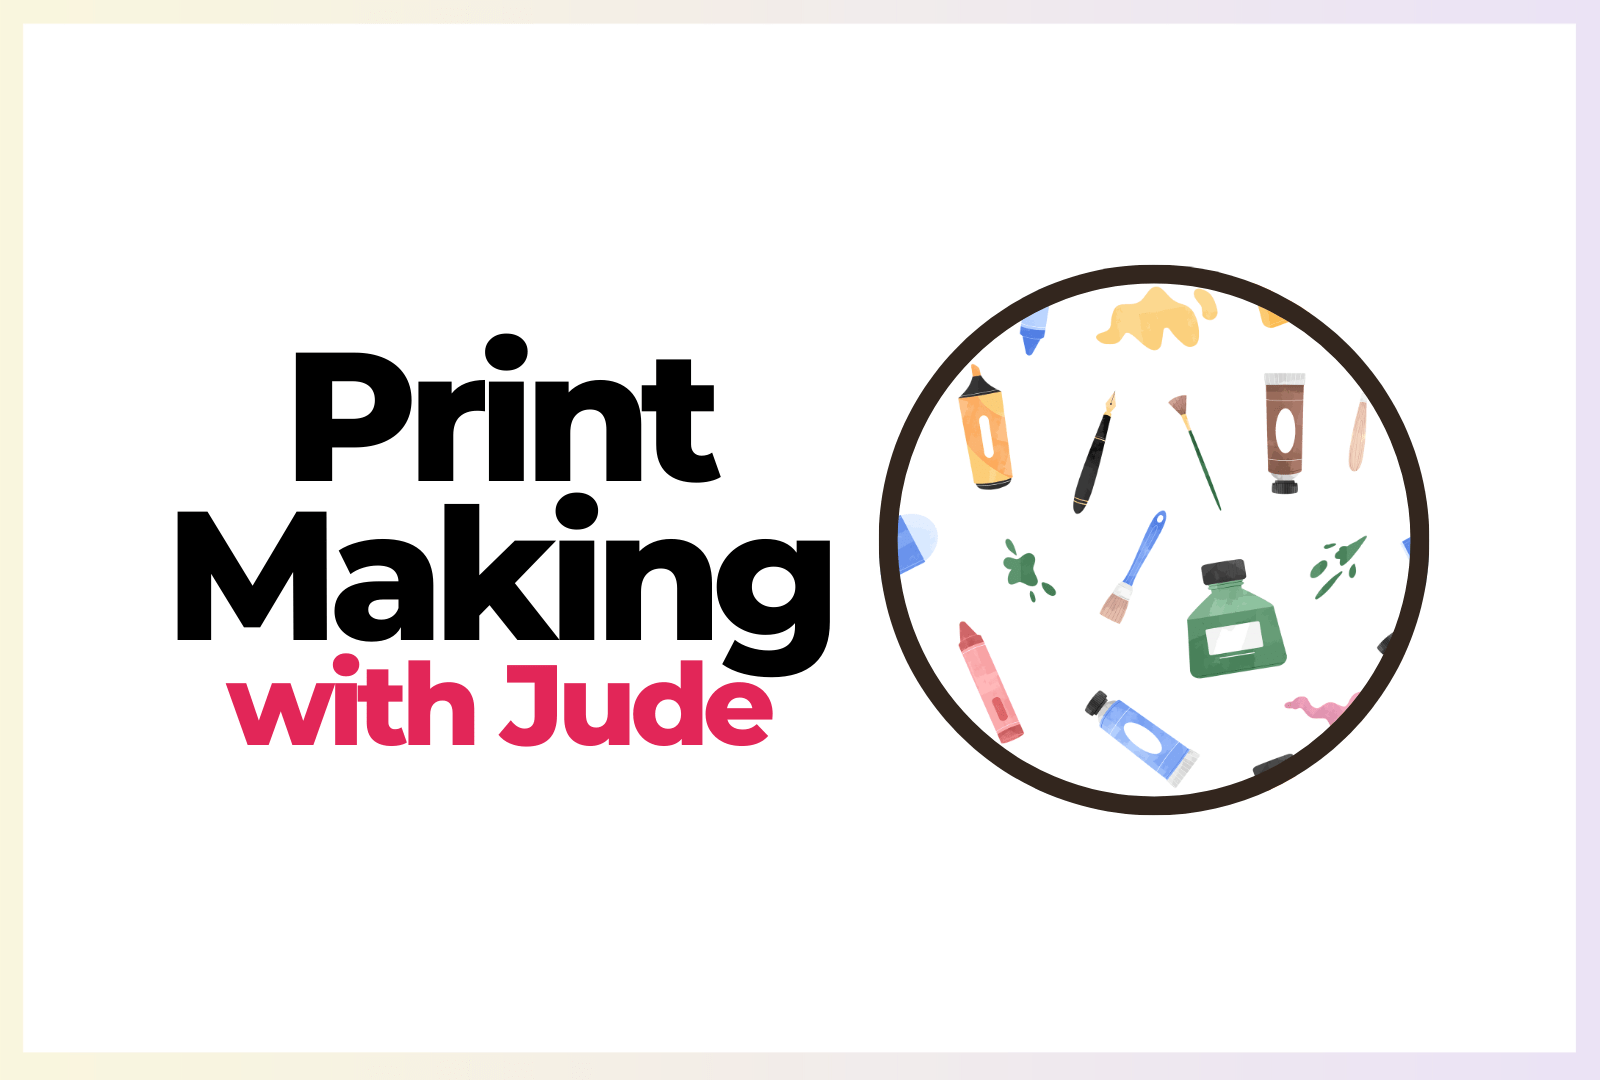 An Image saying 'Print Making with Jude'